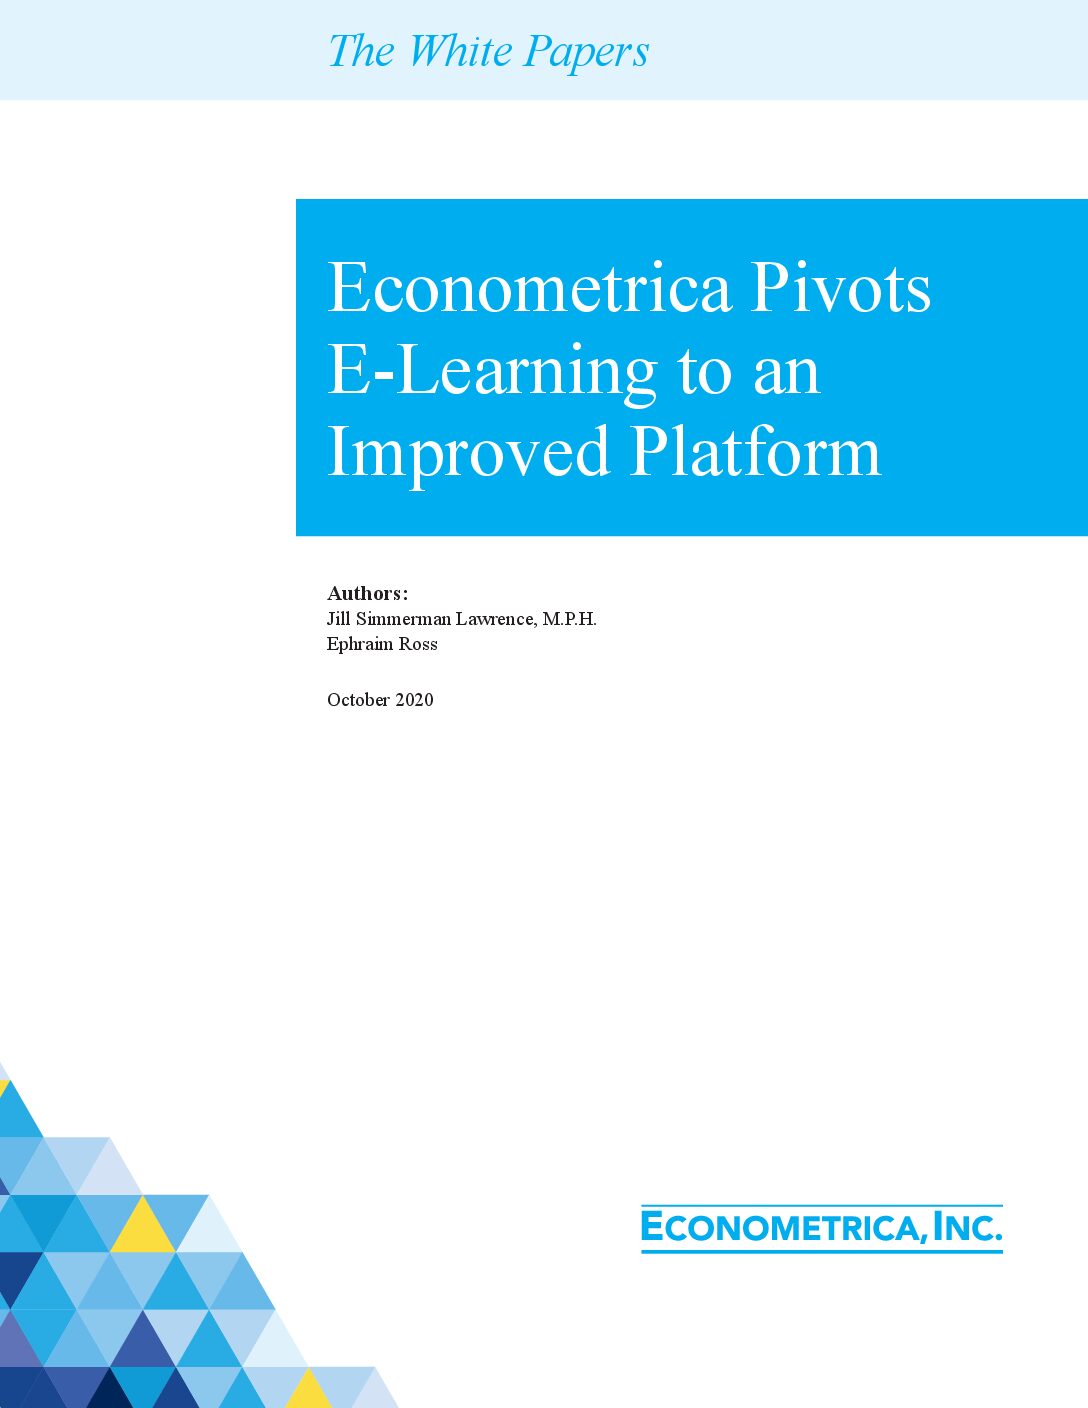 eLearning White Paper Oct2020 pdf